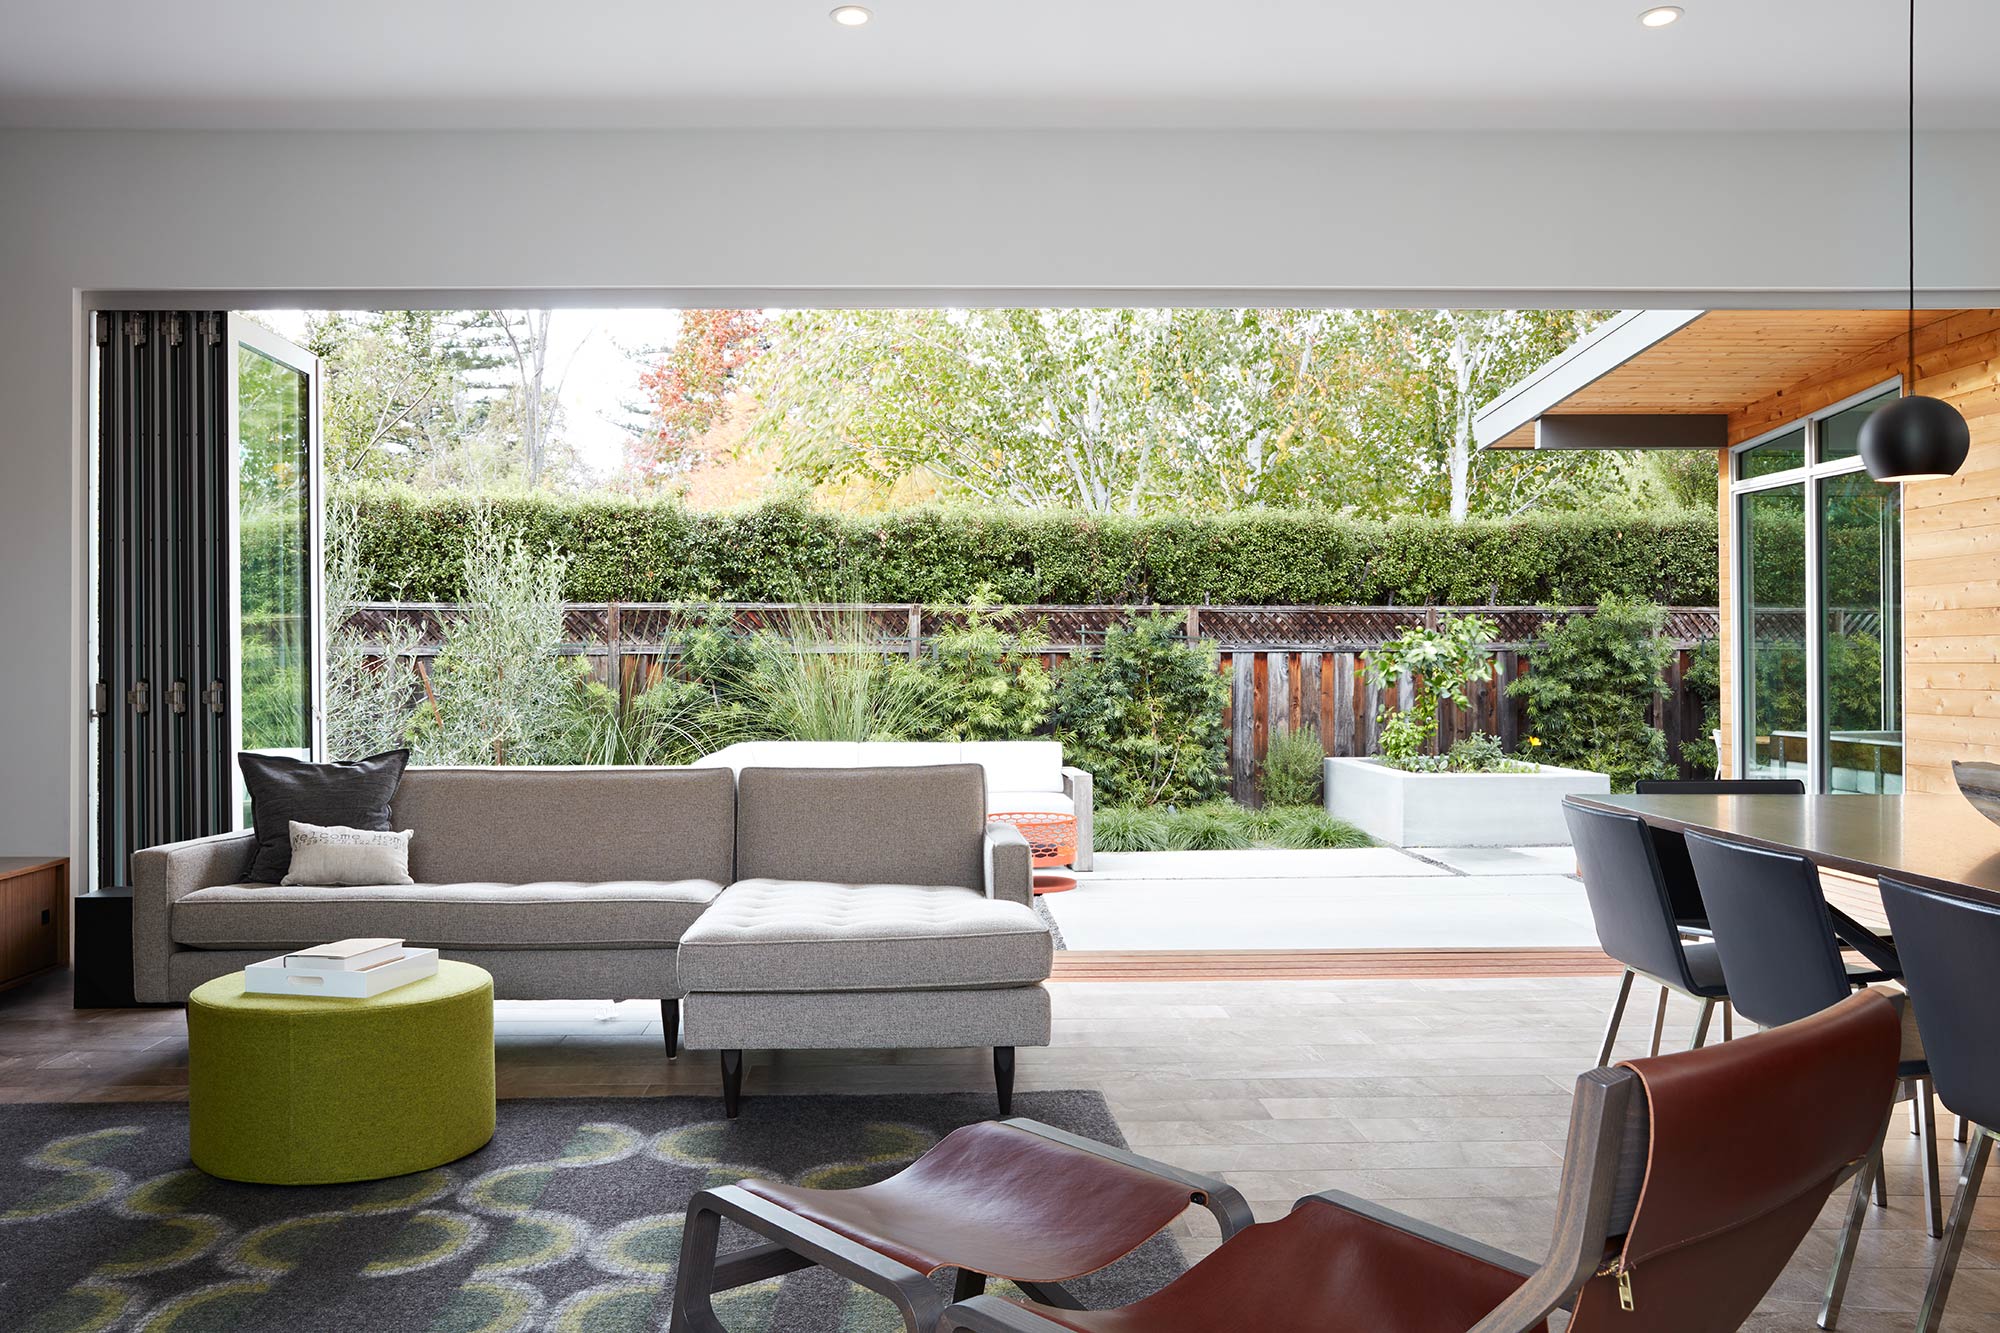 An open, wall-length bi-fold door completely connects the great room to a patio surrounded by lots of plants.